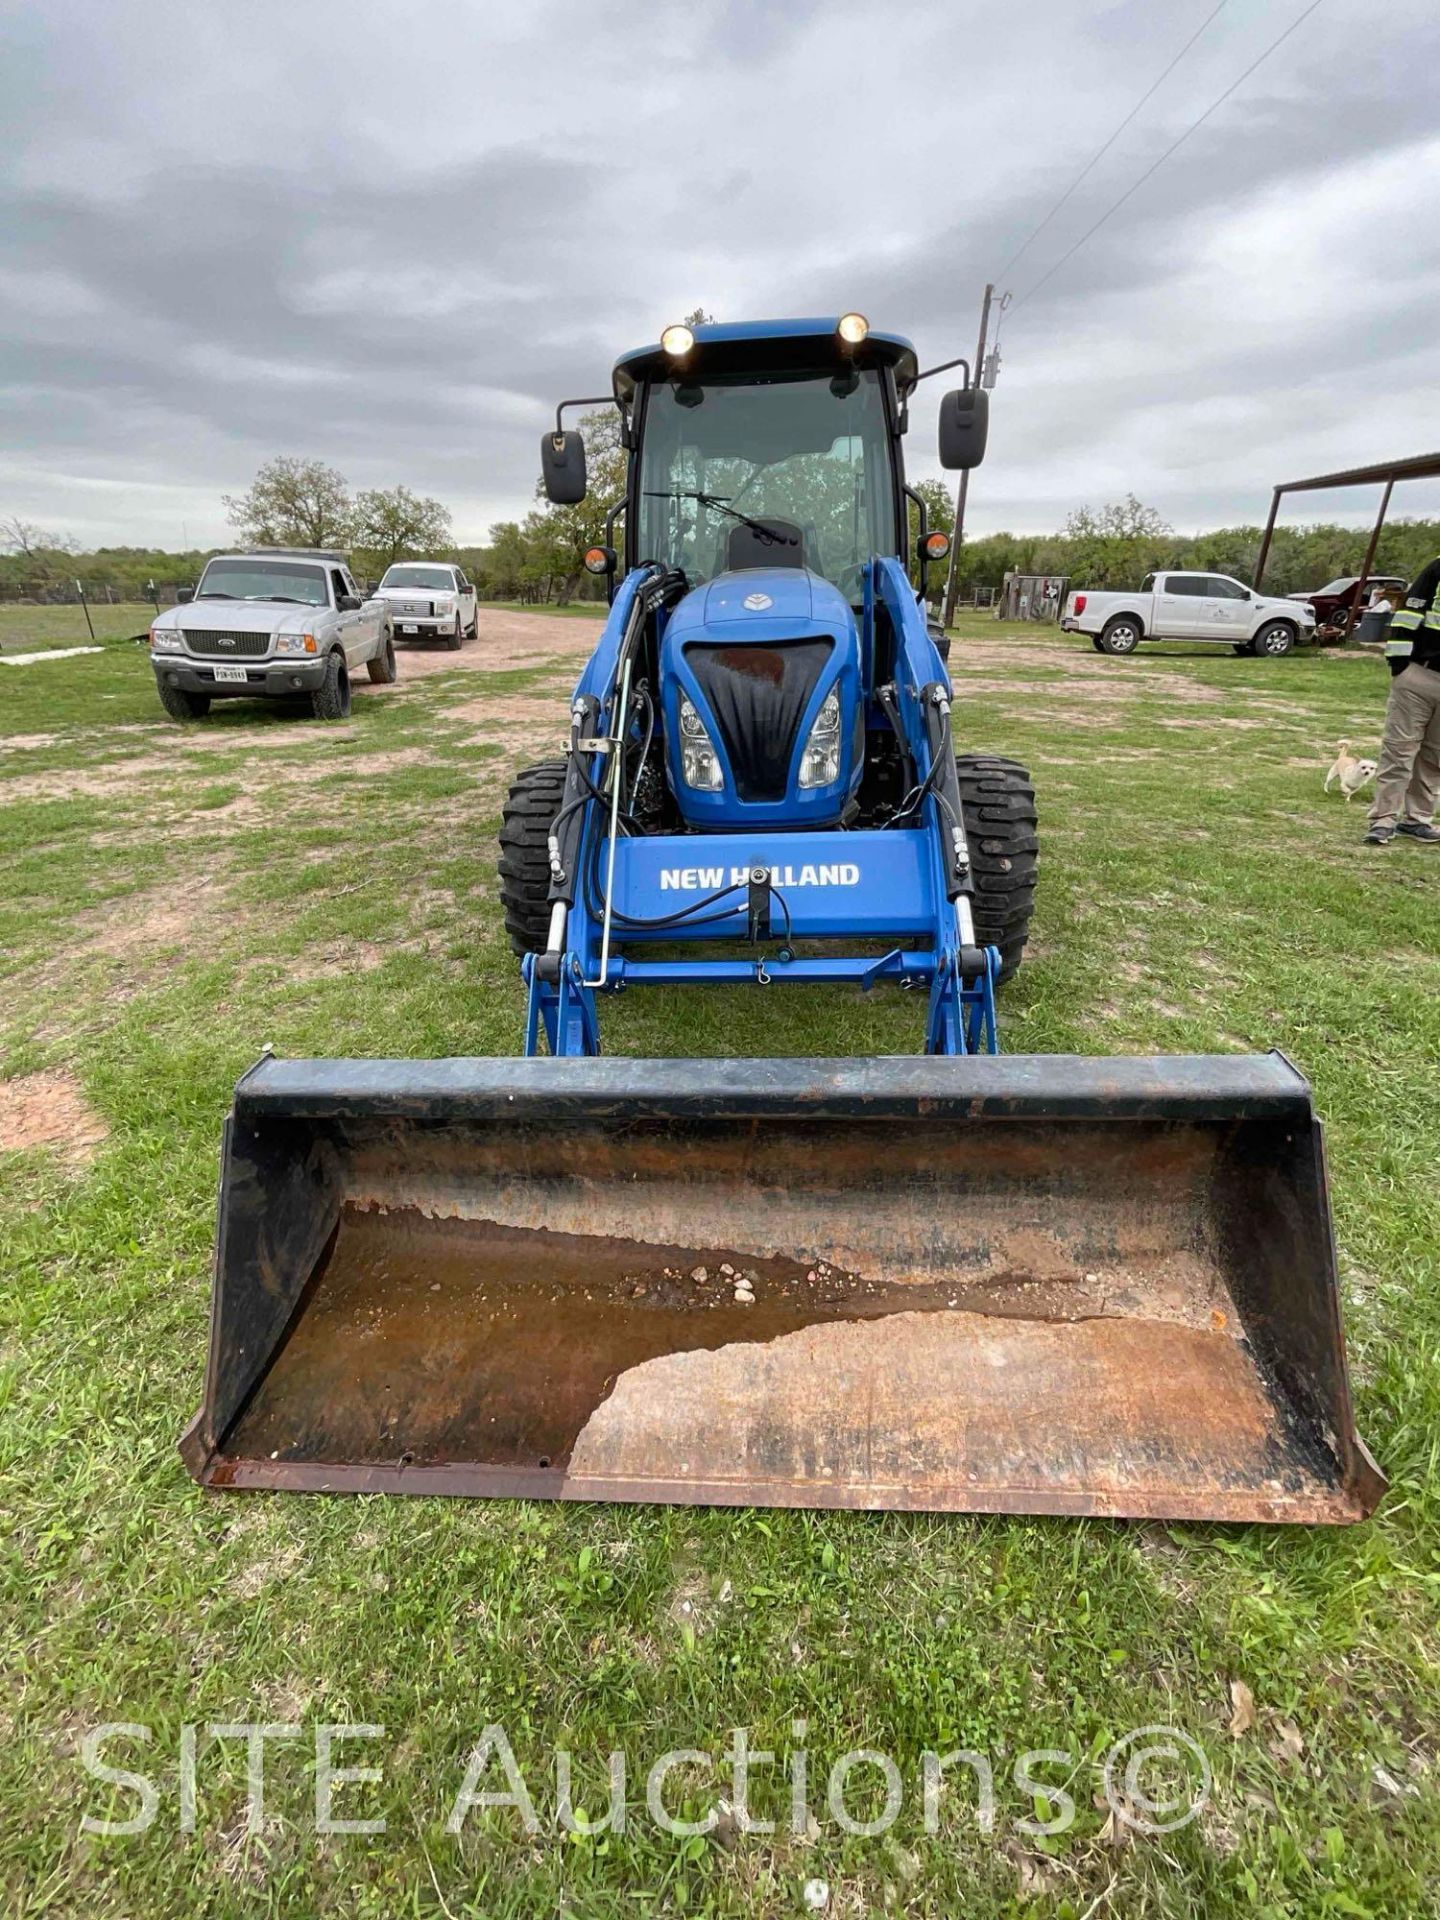 2021 New Holland Boomer 45 Tractor - Image 2 of 12